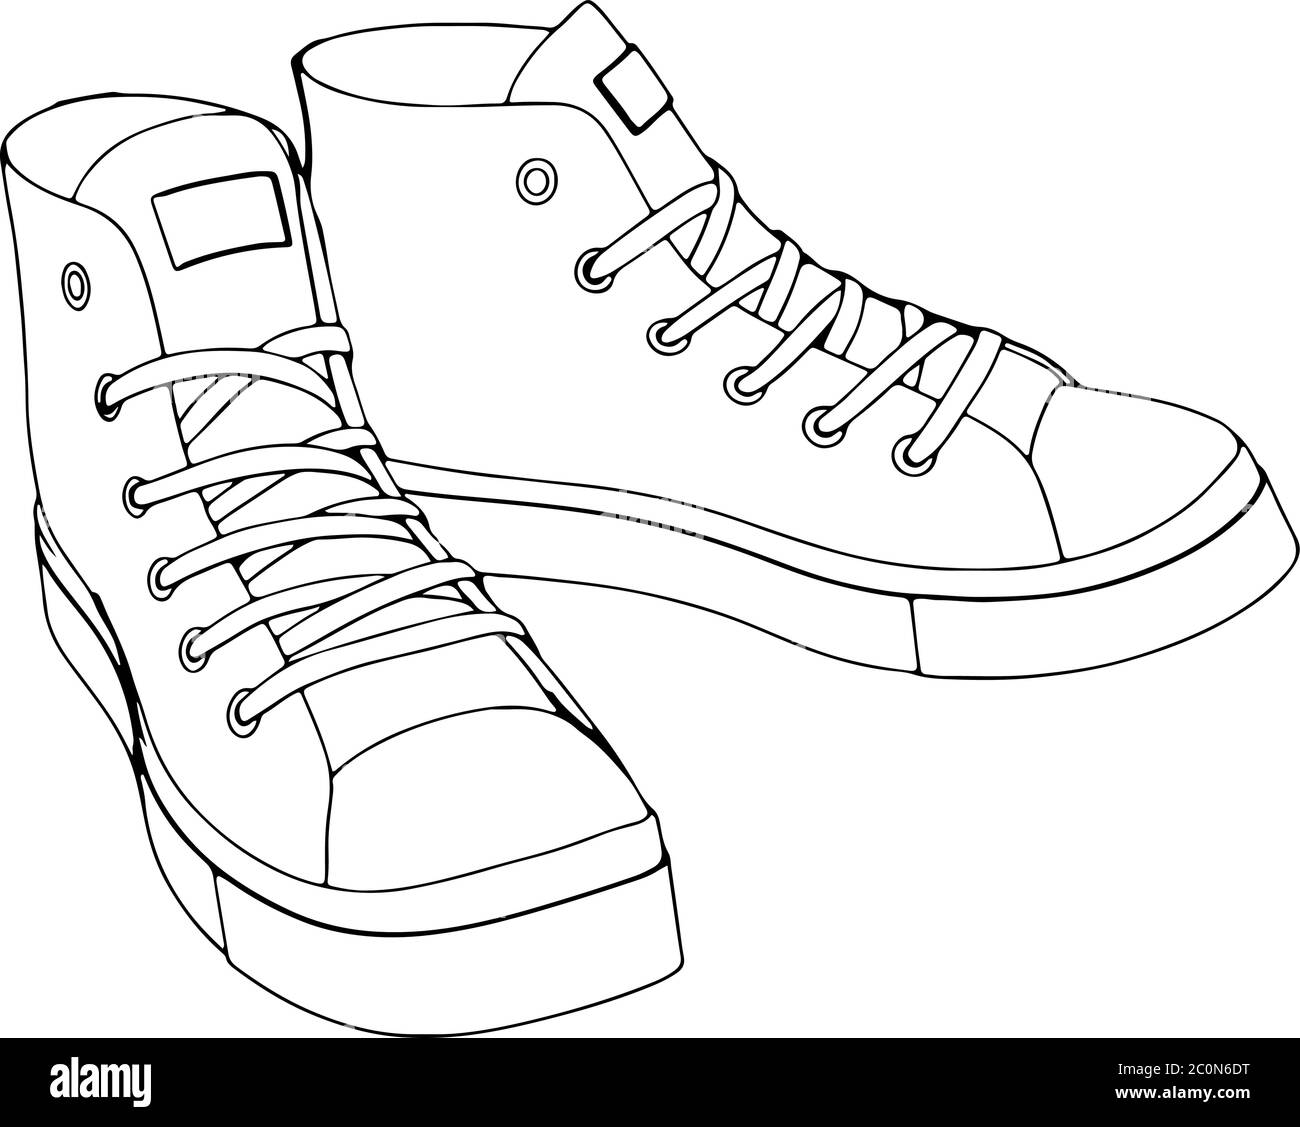 sketch of sneakers on a white background vector Stock Vector Image ...